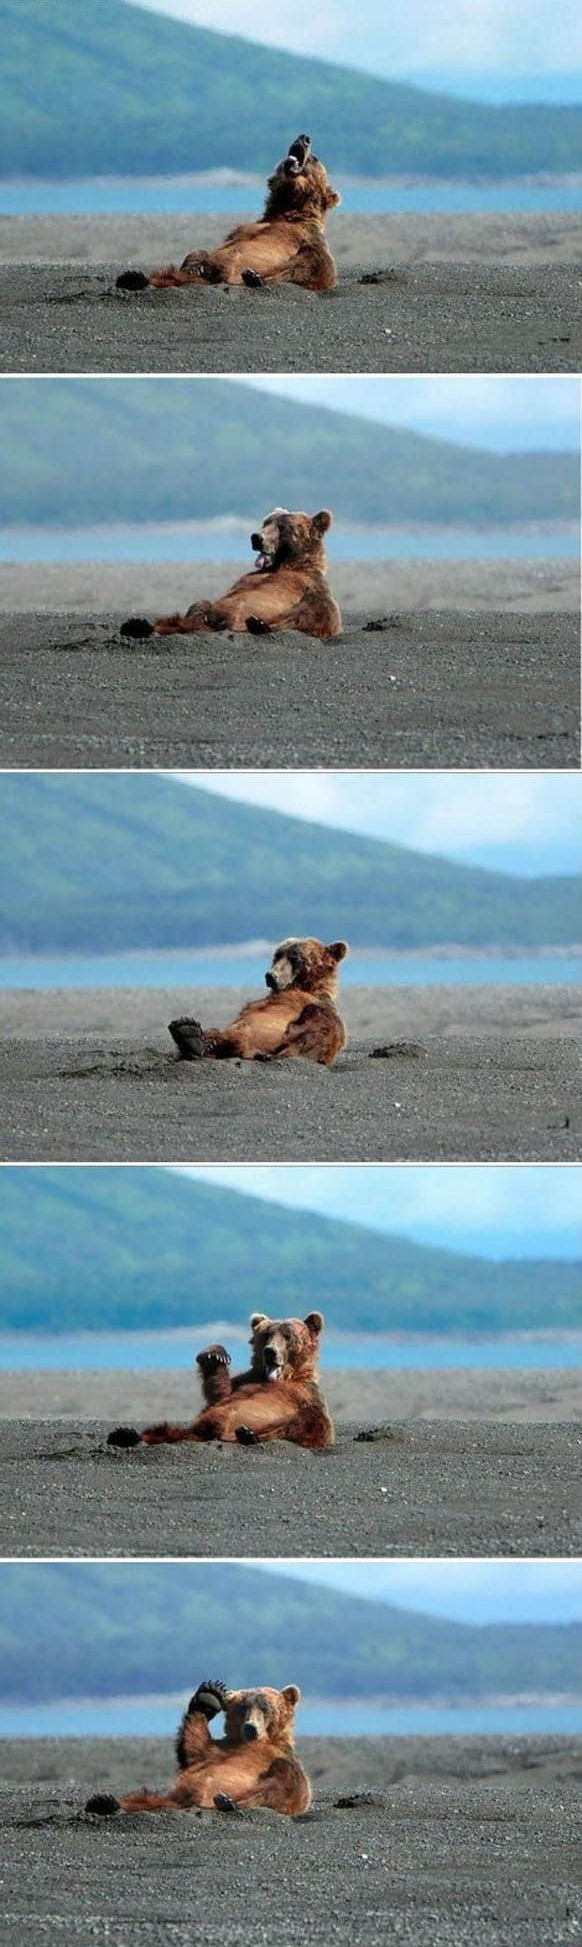 Hello there bear. my friend sent me this along with other funny photos &lt;br /&gt; i dont care if you thumbs up it or thumbs down it i just thought it was funn